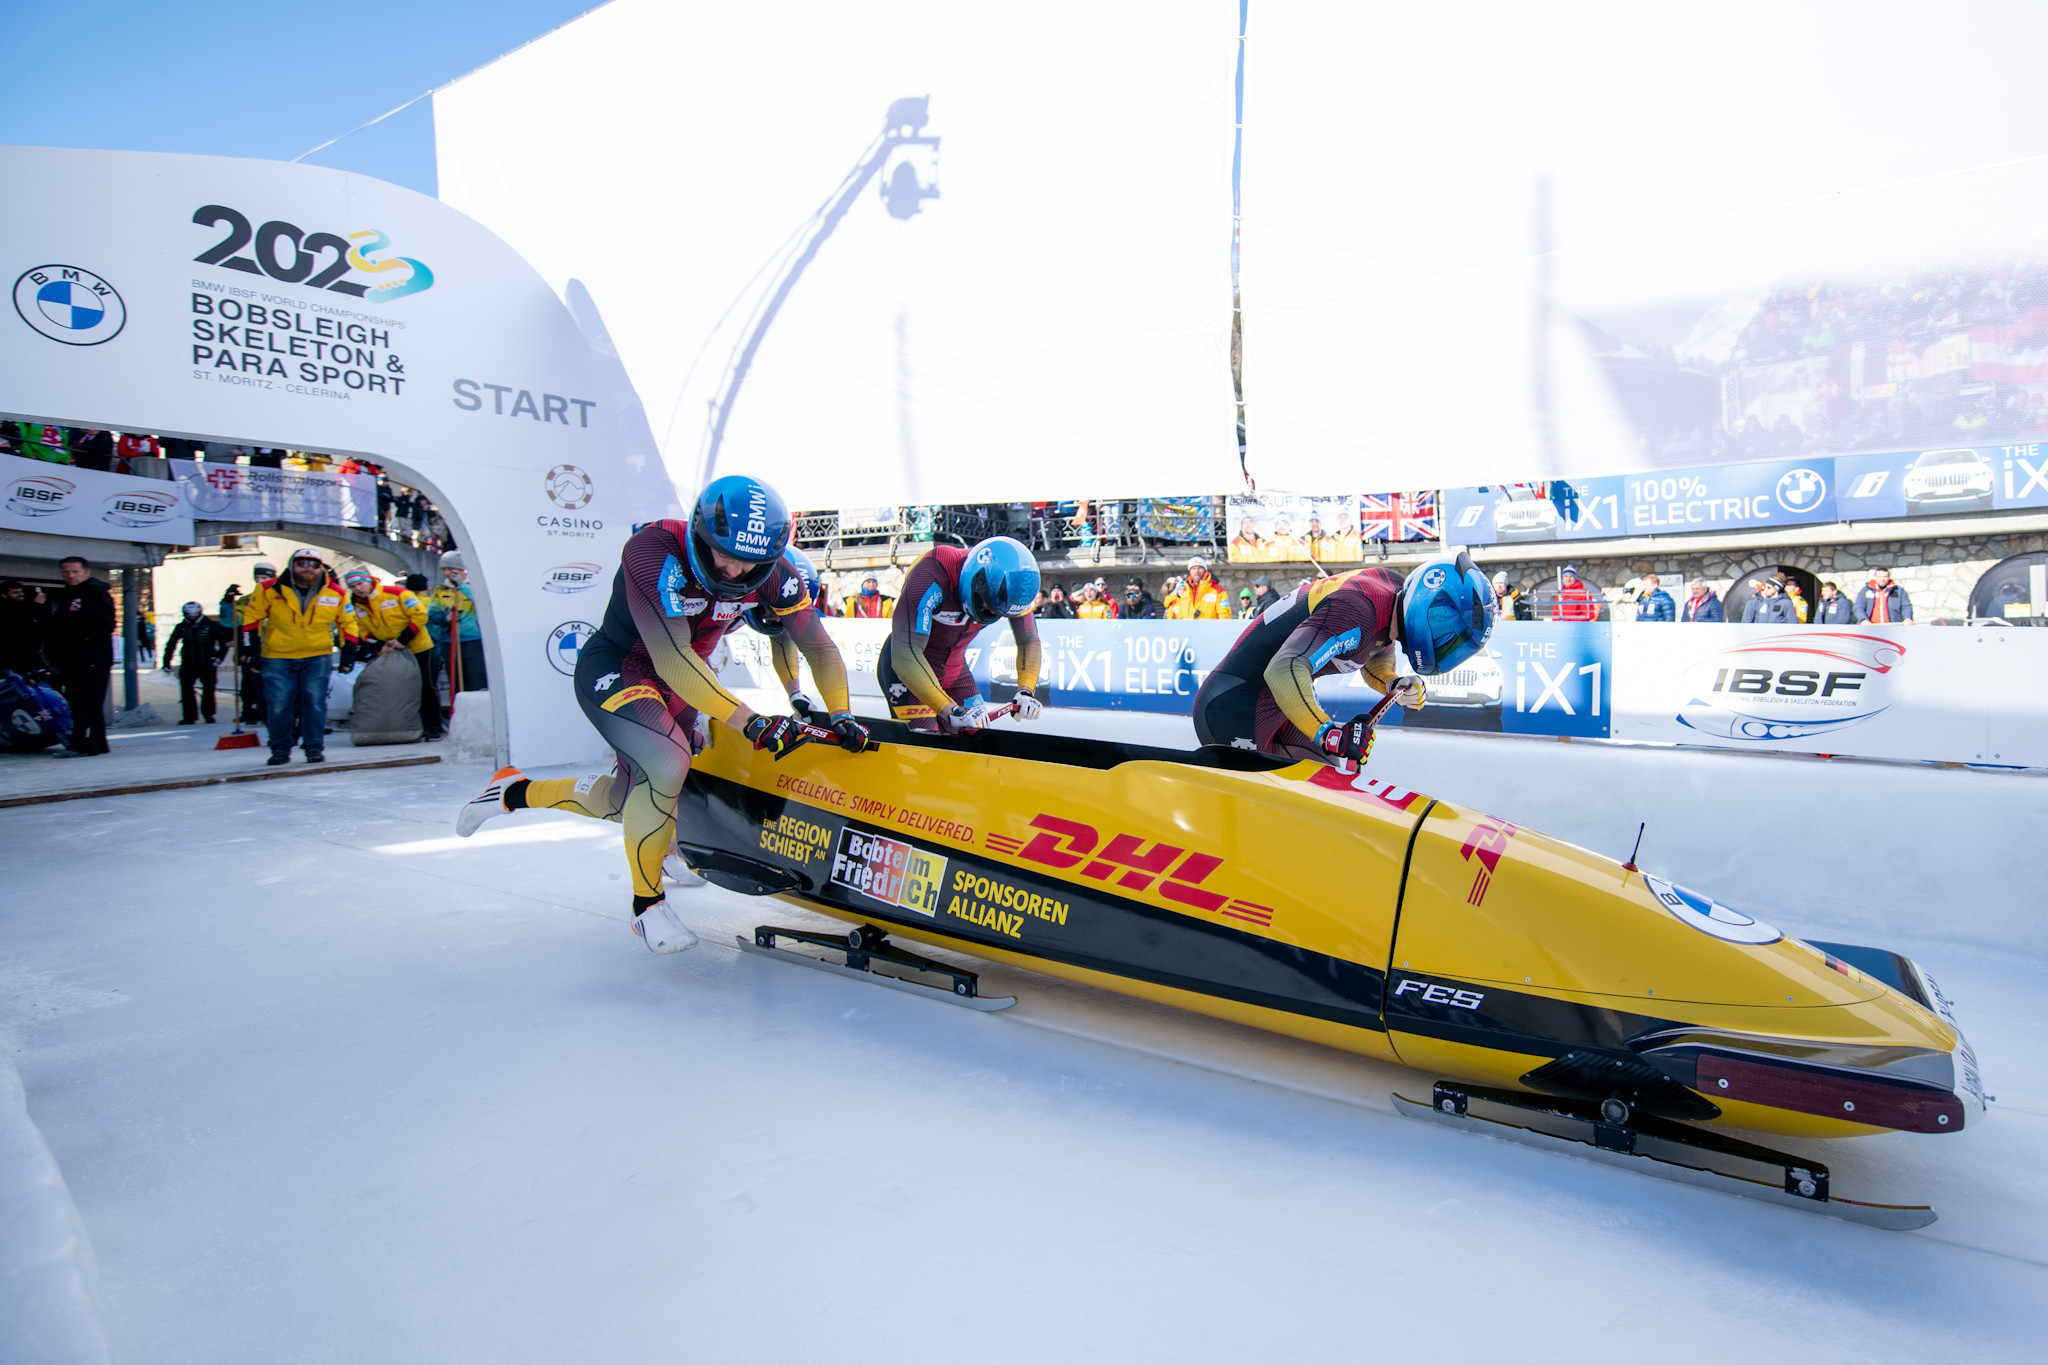 Francesco Friedrich won the gold medal in the four-man bobsleigh for the fifth consecutive IBSF World Championships with victory in St Moritz today ©IBSF